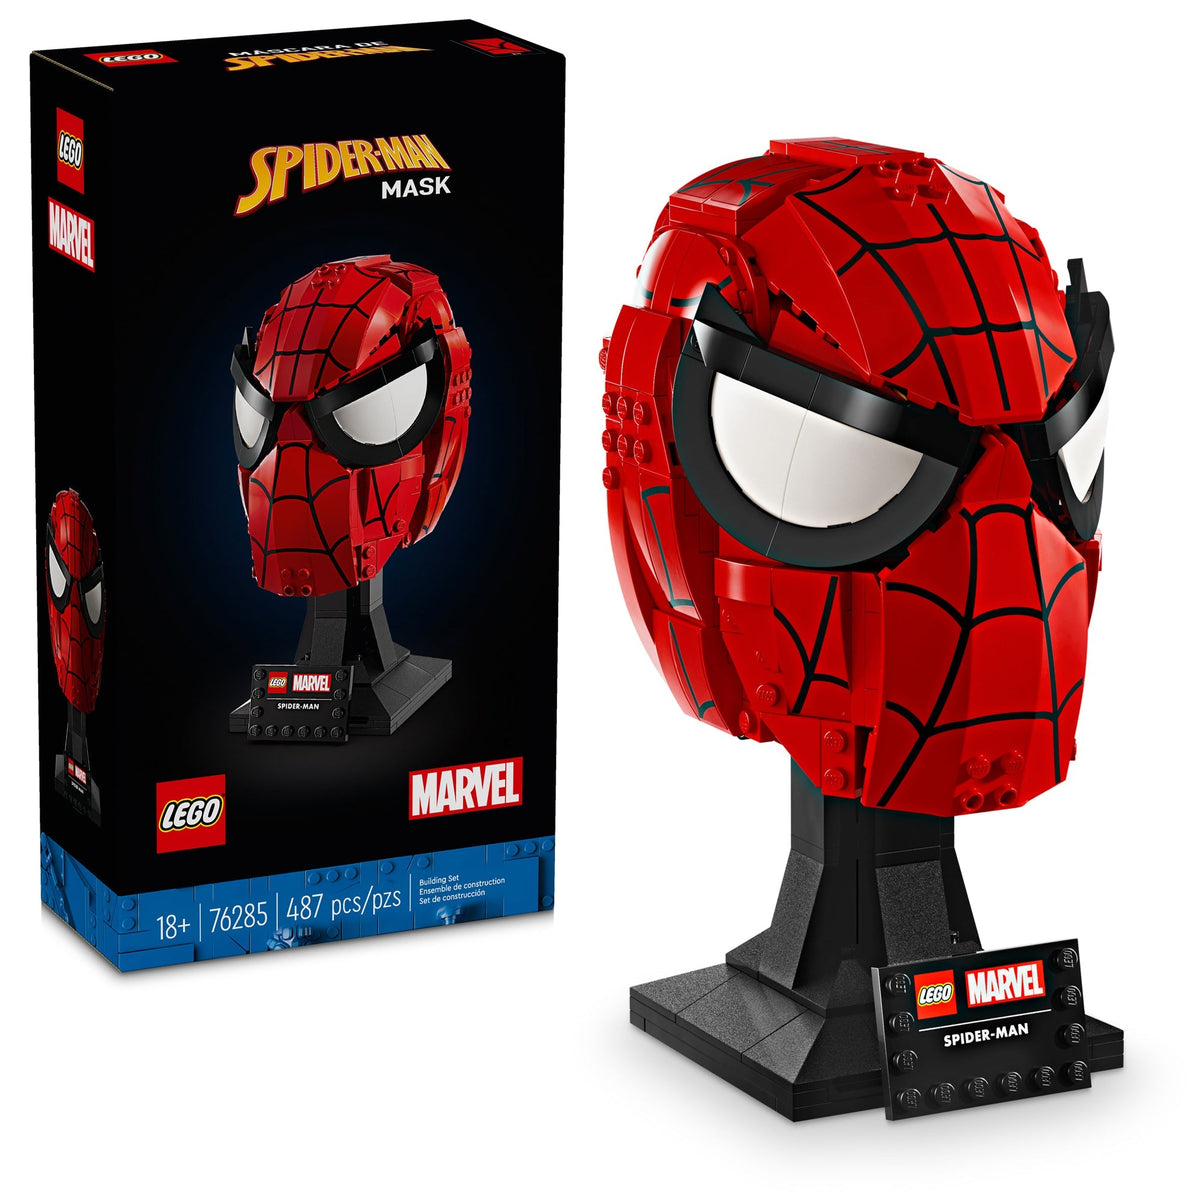 LEGO Toys & Games LEGO Marvel Spider-Man's Mask, 76285, Ages 18+, 487 Pieces 673419394291